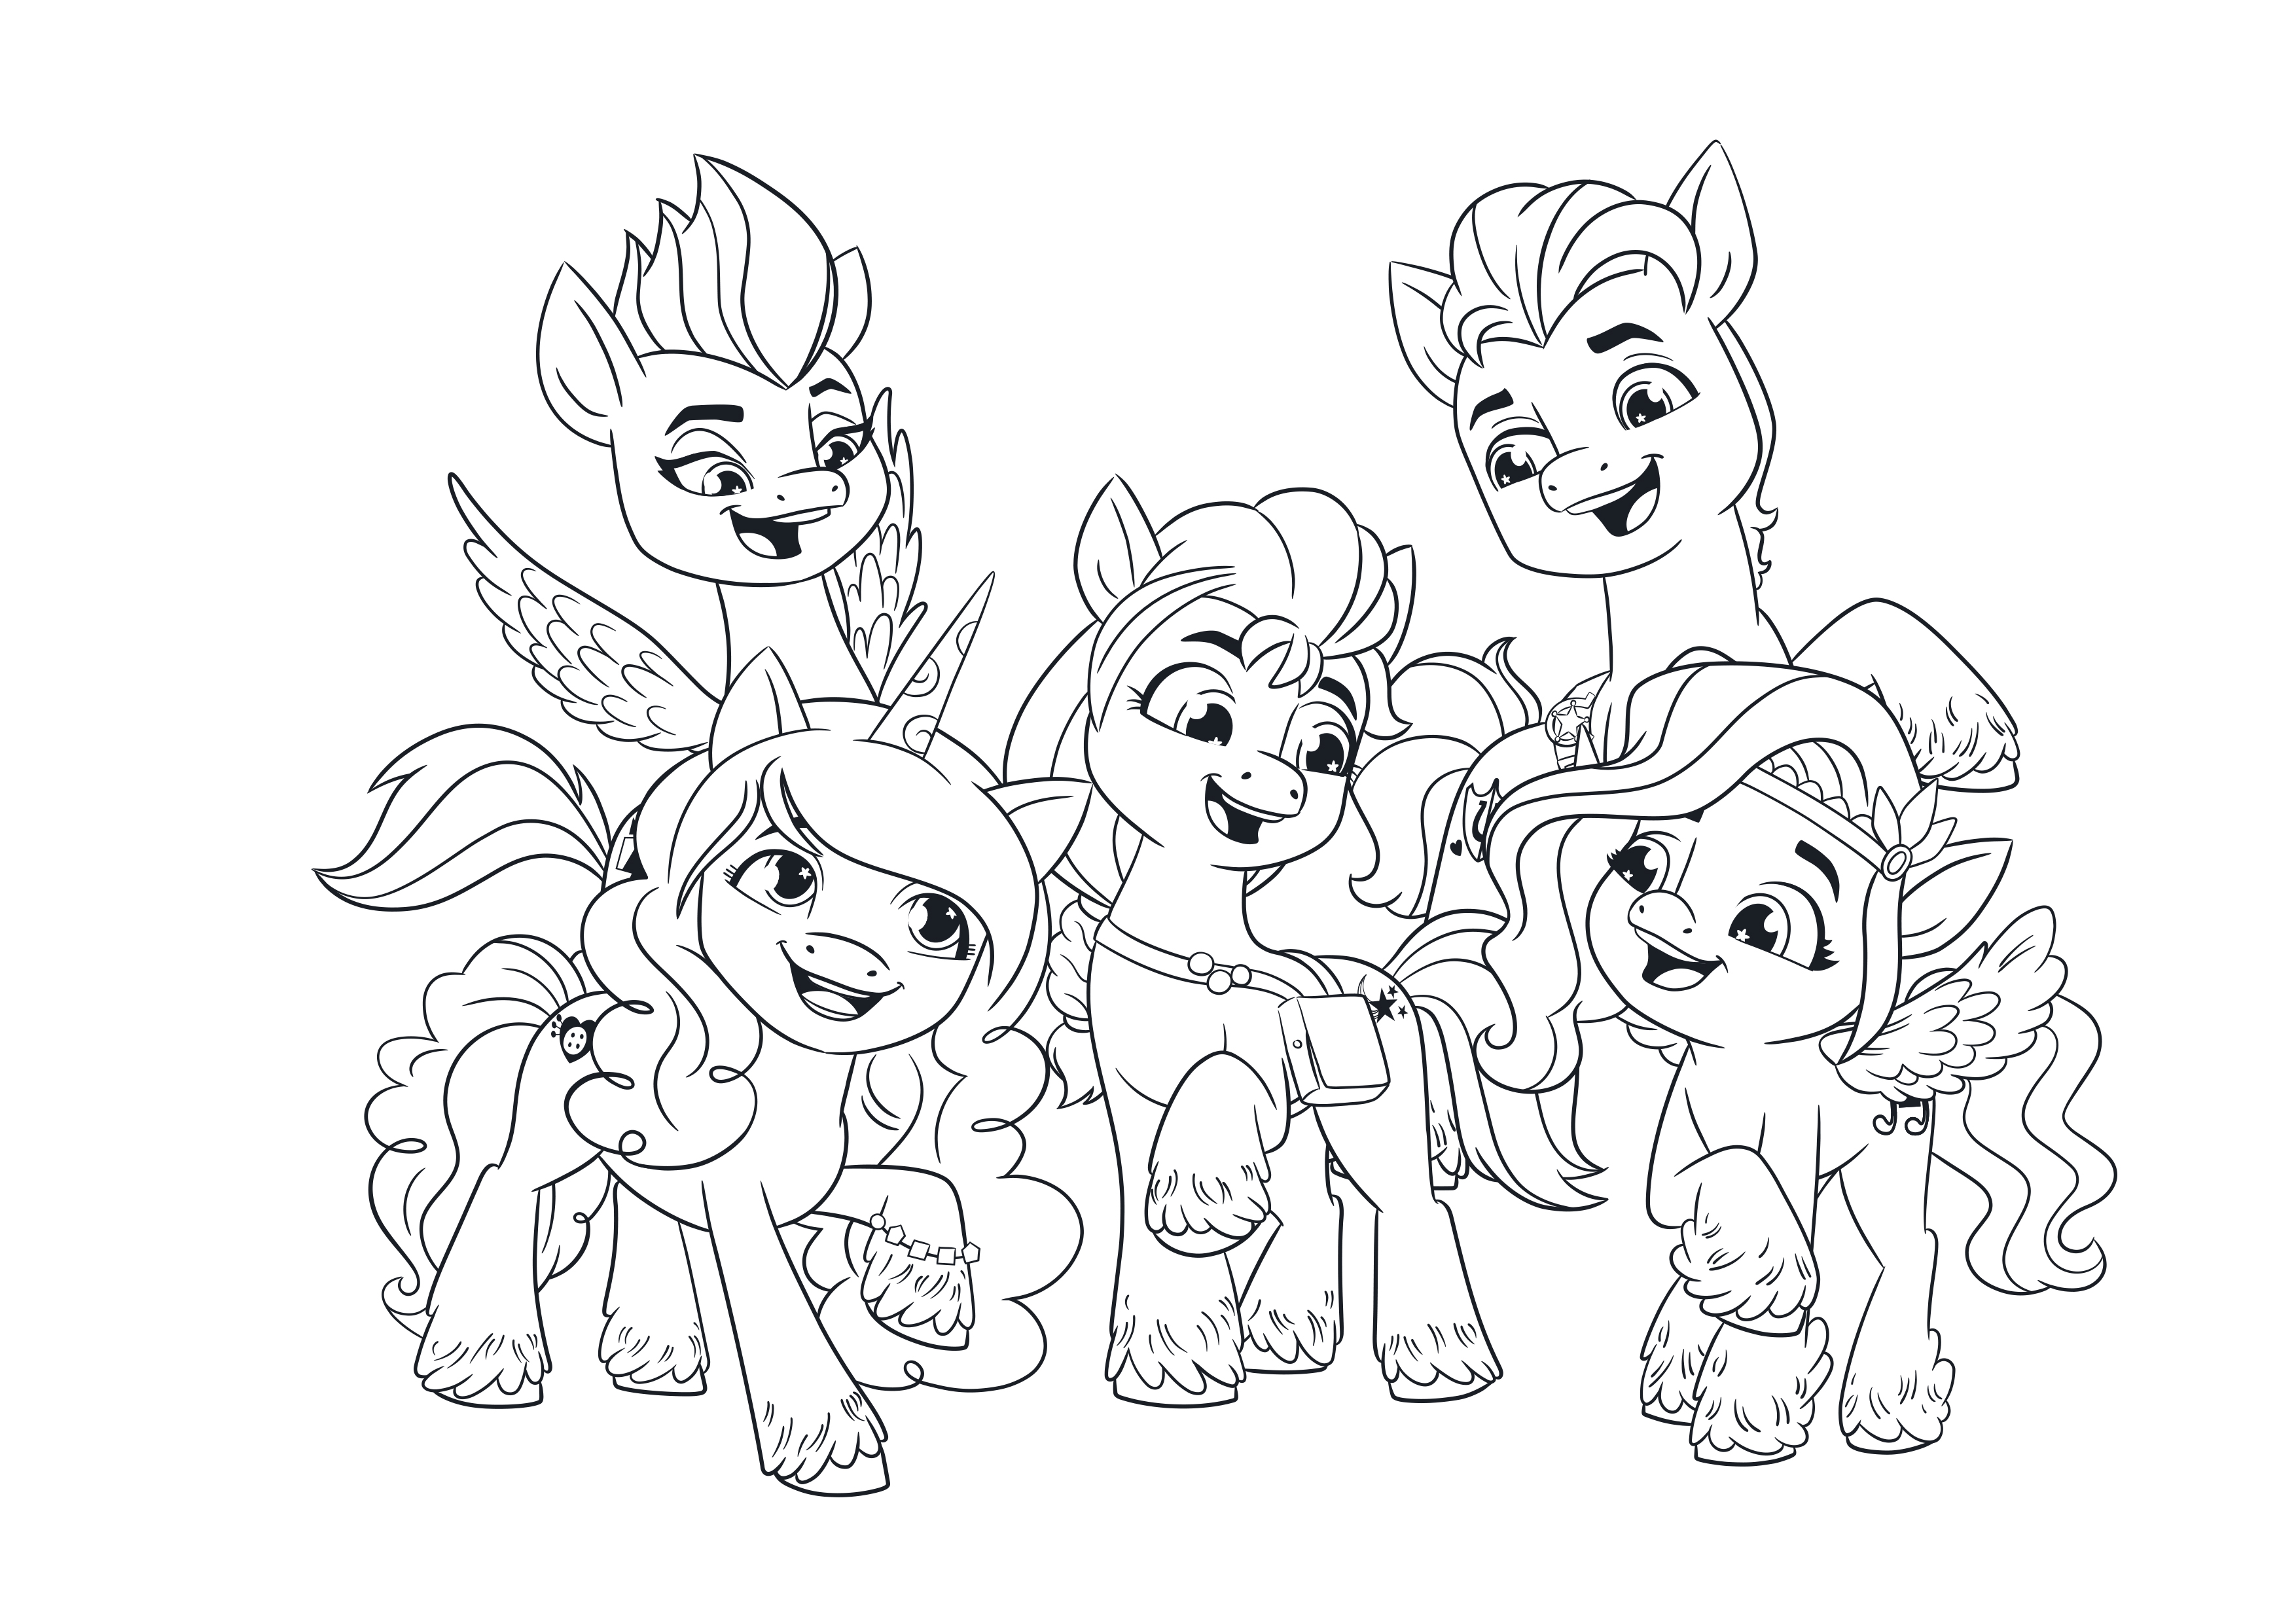 Free Printable My Little Pony Coloring Pages For Kids  My little pony  coloring, My little pony movie, My little pony twilight